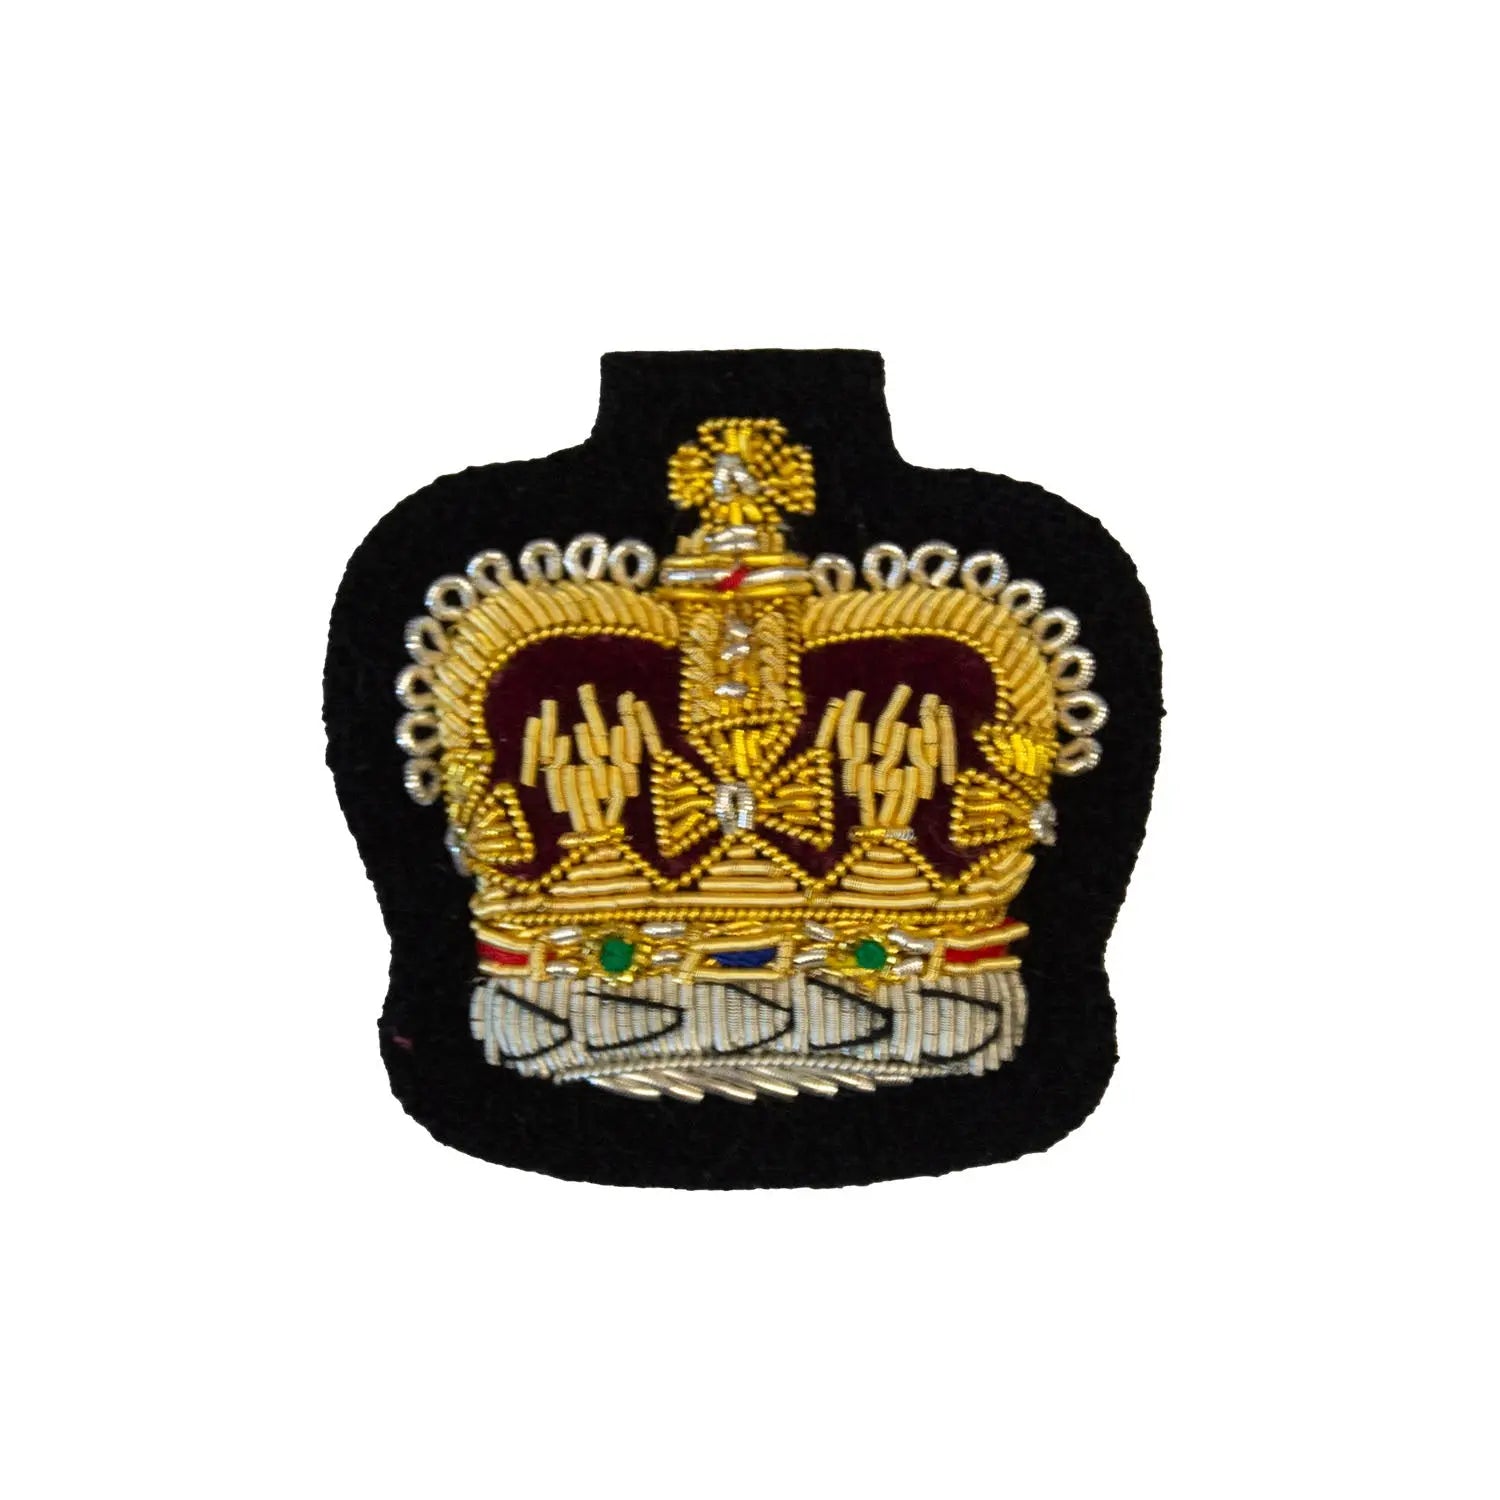 QMS, CSgt and SSgt Small Crown Rank Badge Royal Tank Regiment NCO British Army wyedean